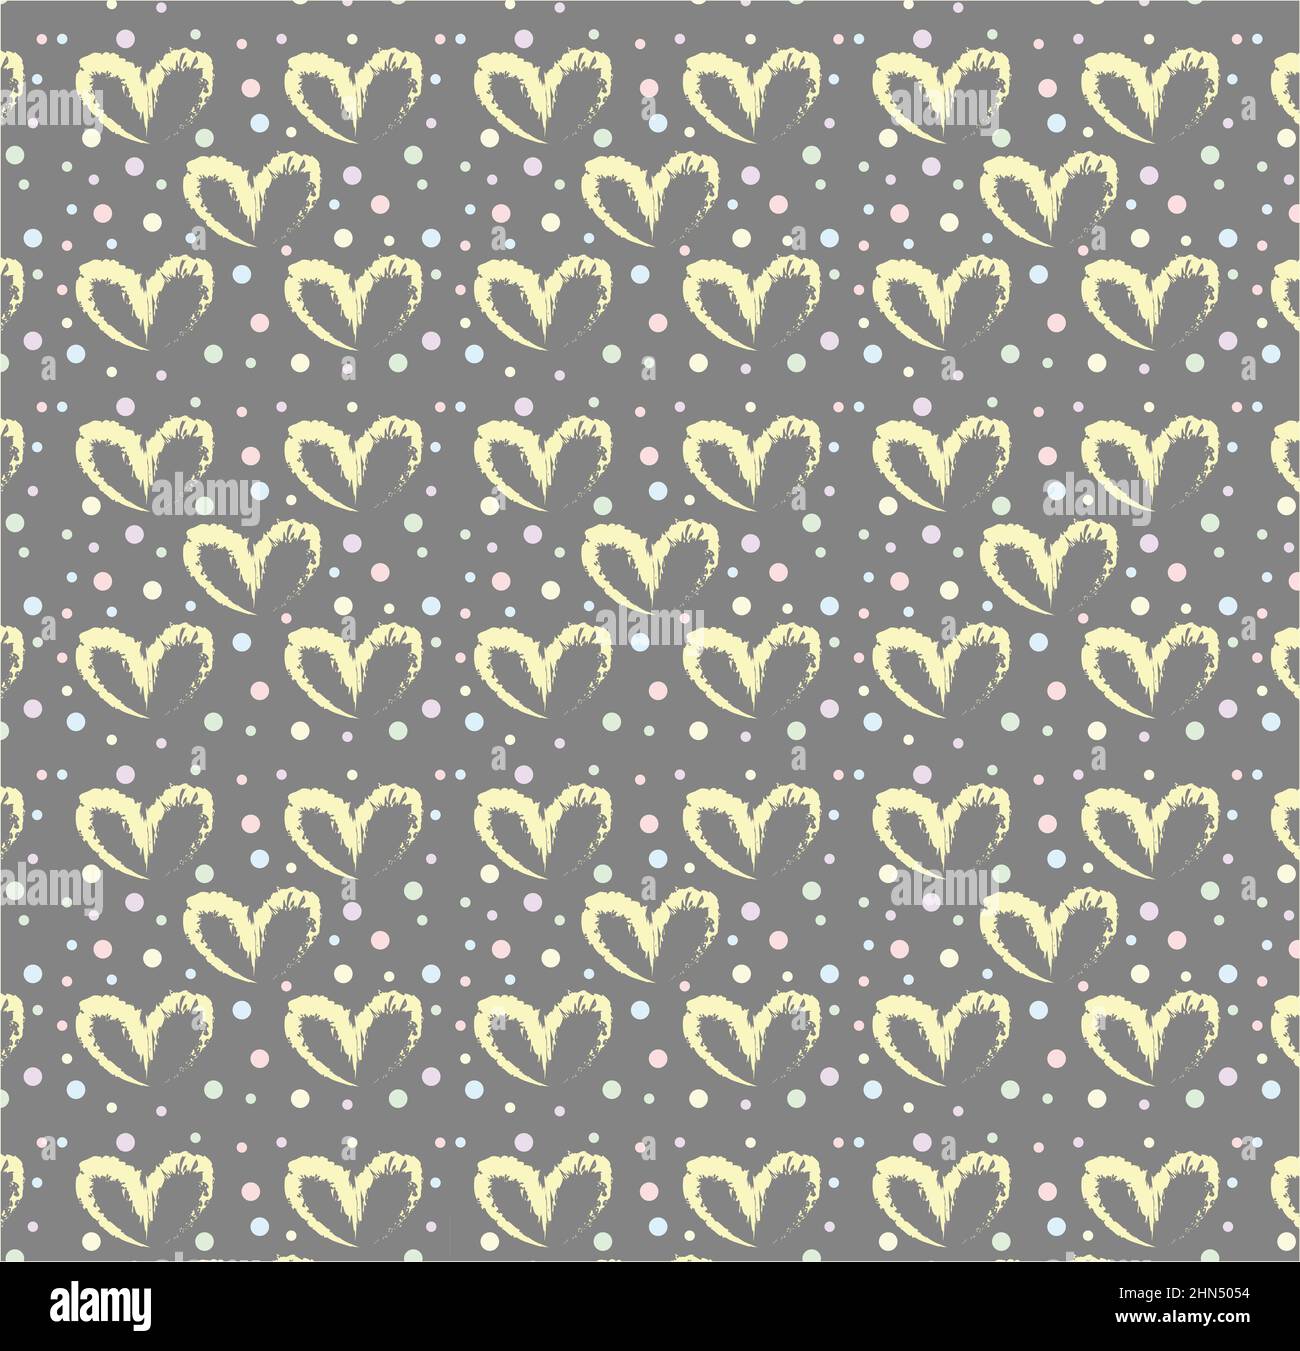 Seamless pattern of hand drawn simple hearts in yellow on gray background with colored dots in pastel rainbow colors Stock Photo